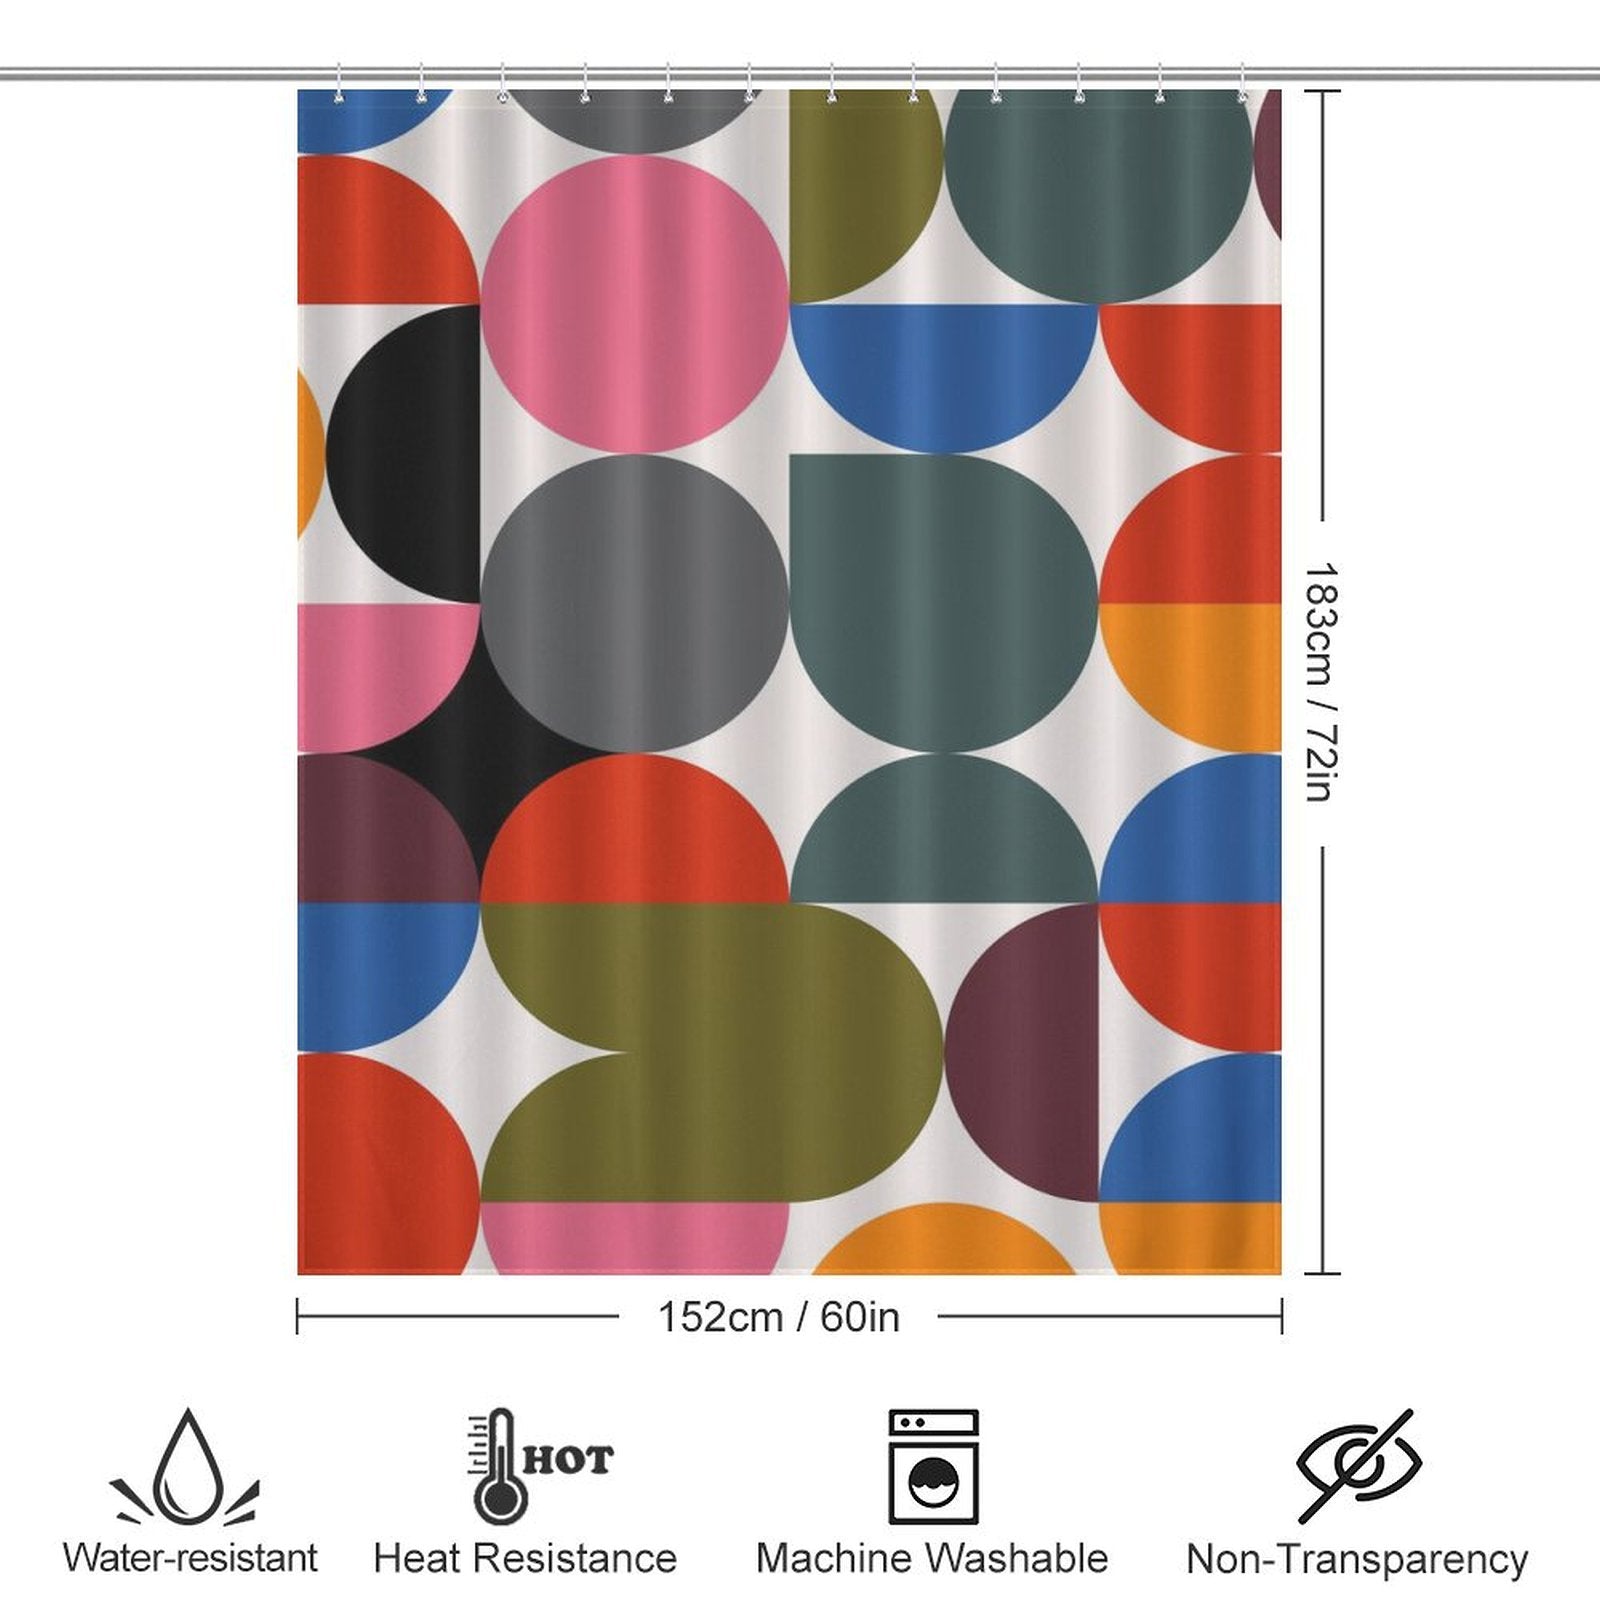 The Abstract Modern Art Rainbow Polka Dot Geometric Shower Curtain-Cottoncat by Cotton Cat has a colorful pattern and dimensions of 183cm x 152cm. Icons below indicate it is water-resistant, heat-resistant, machine washable, and not transparent. This piece combines the practicality of a shower curtain with the flair of abstract modern art.